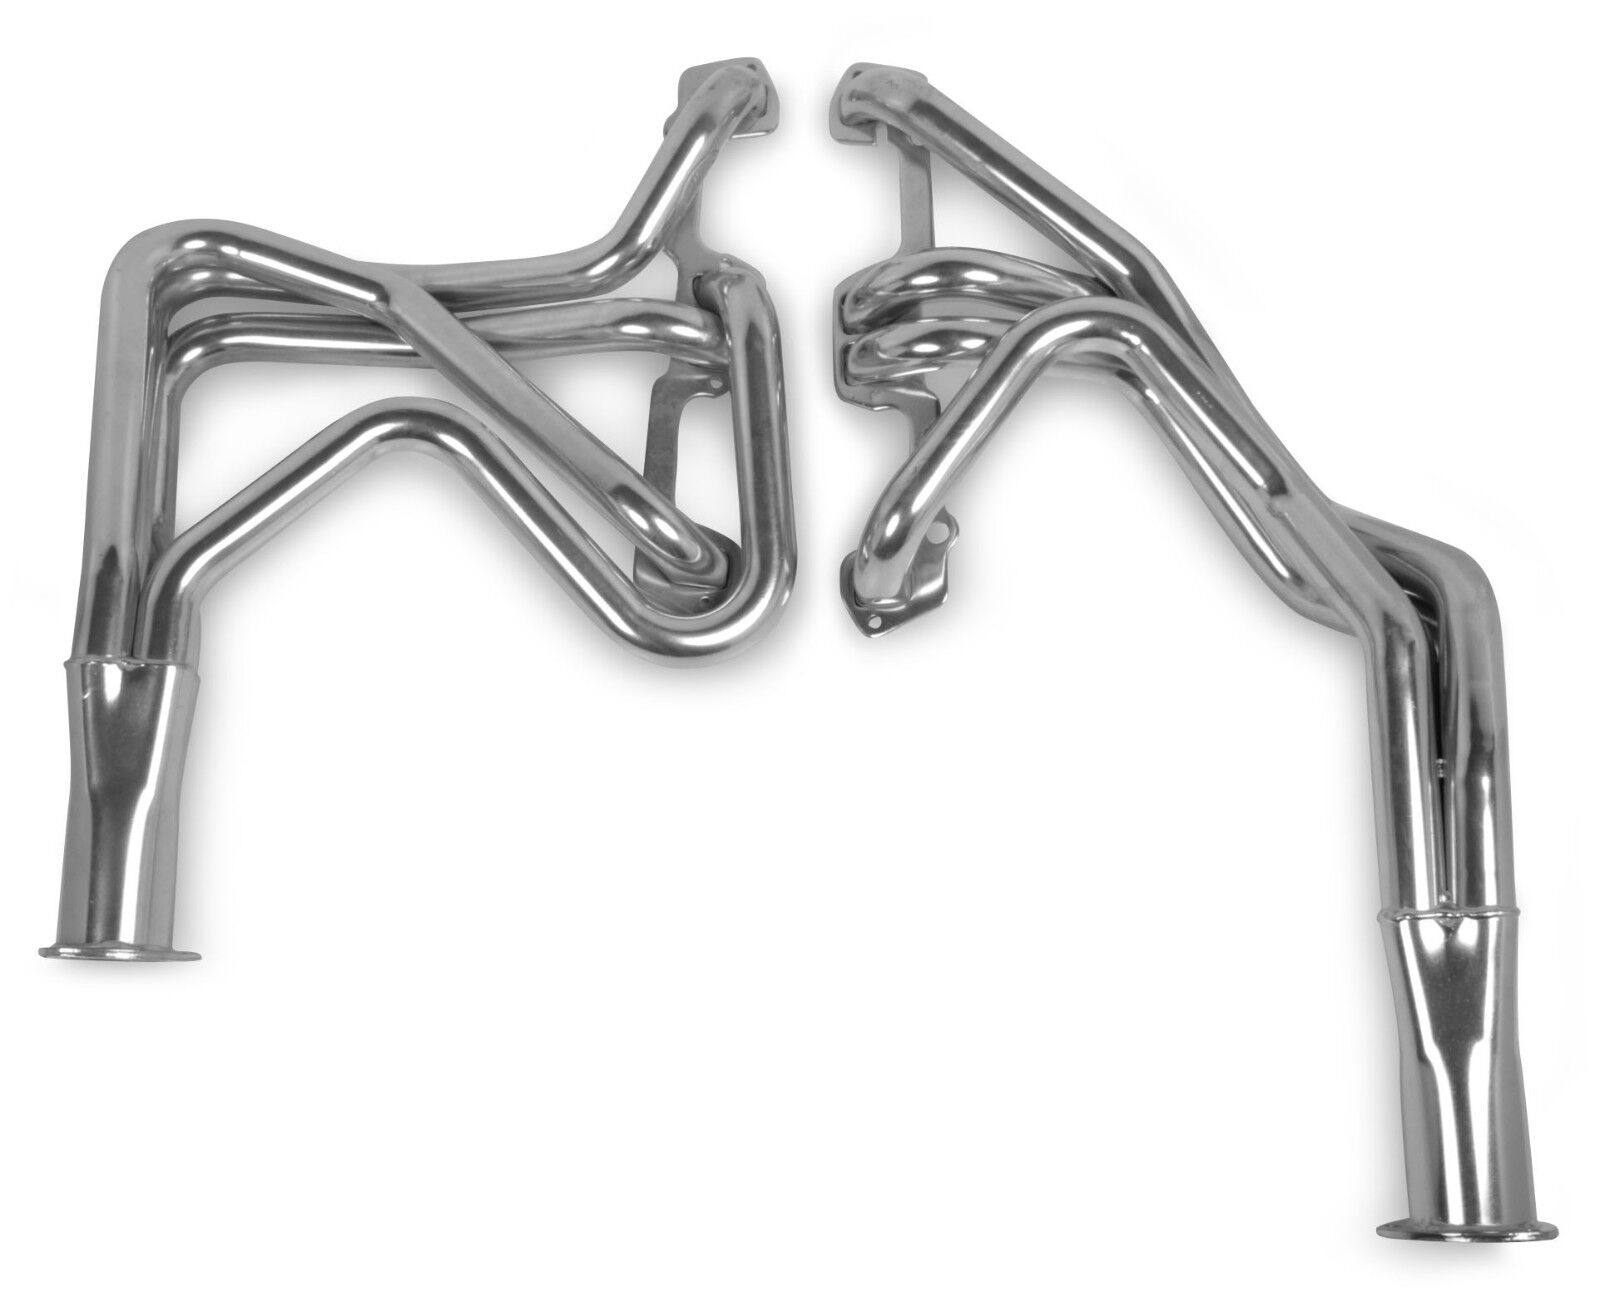 Hooker Comp Headers 5901-1HKR 67-82 Dodge/Plymouth A, B, E, F Bodies 273-360